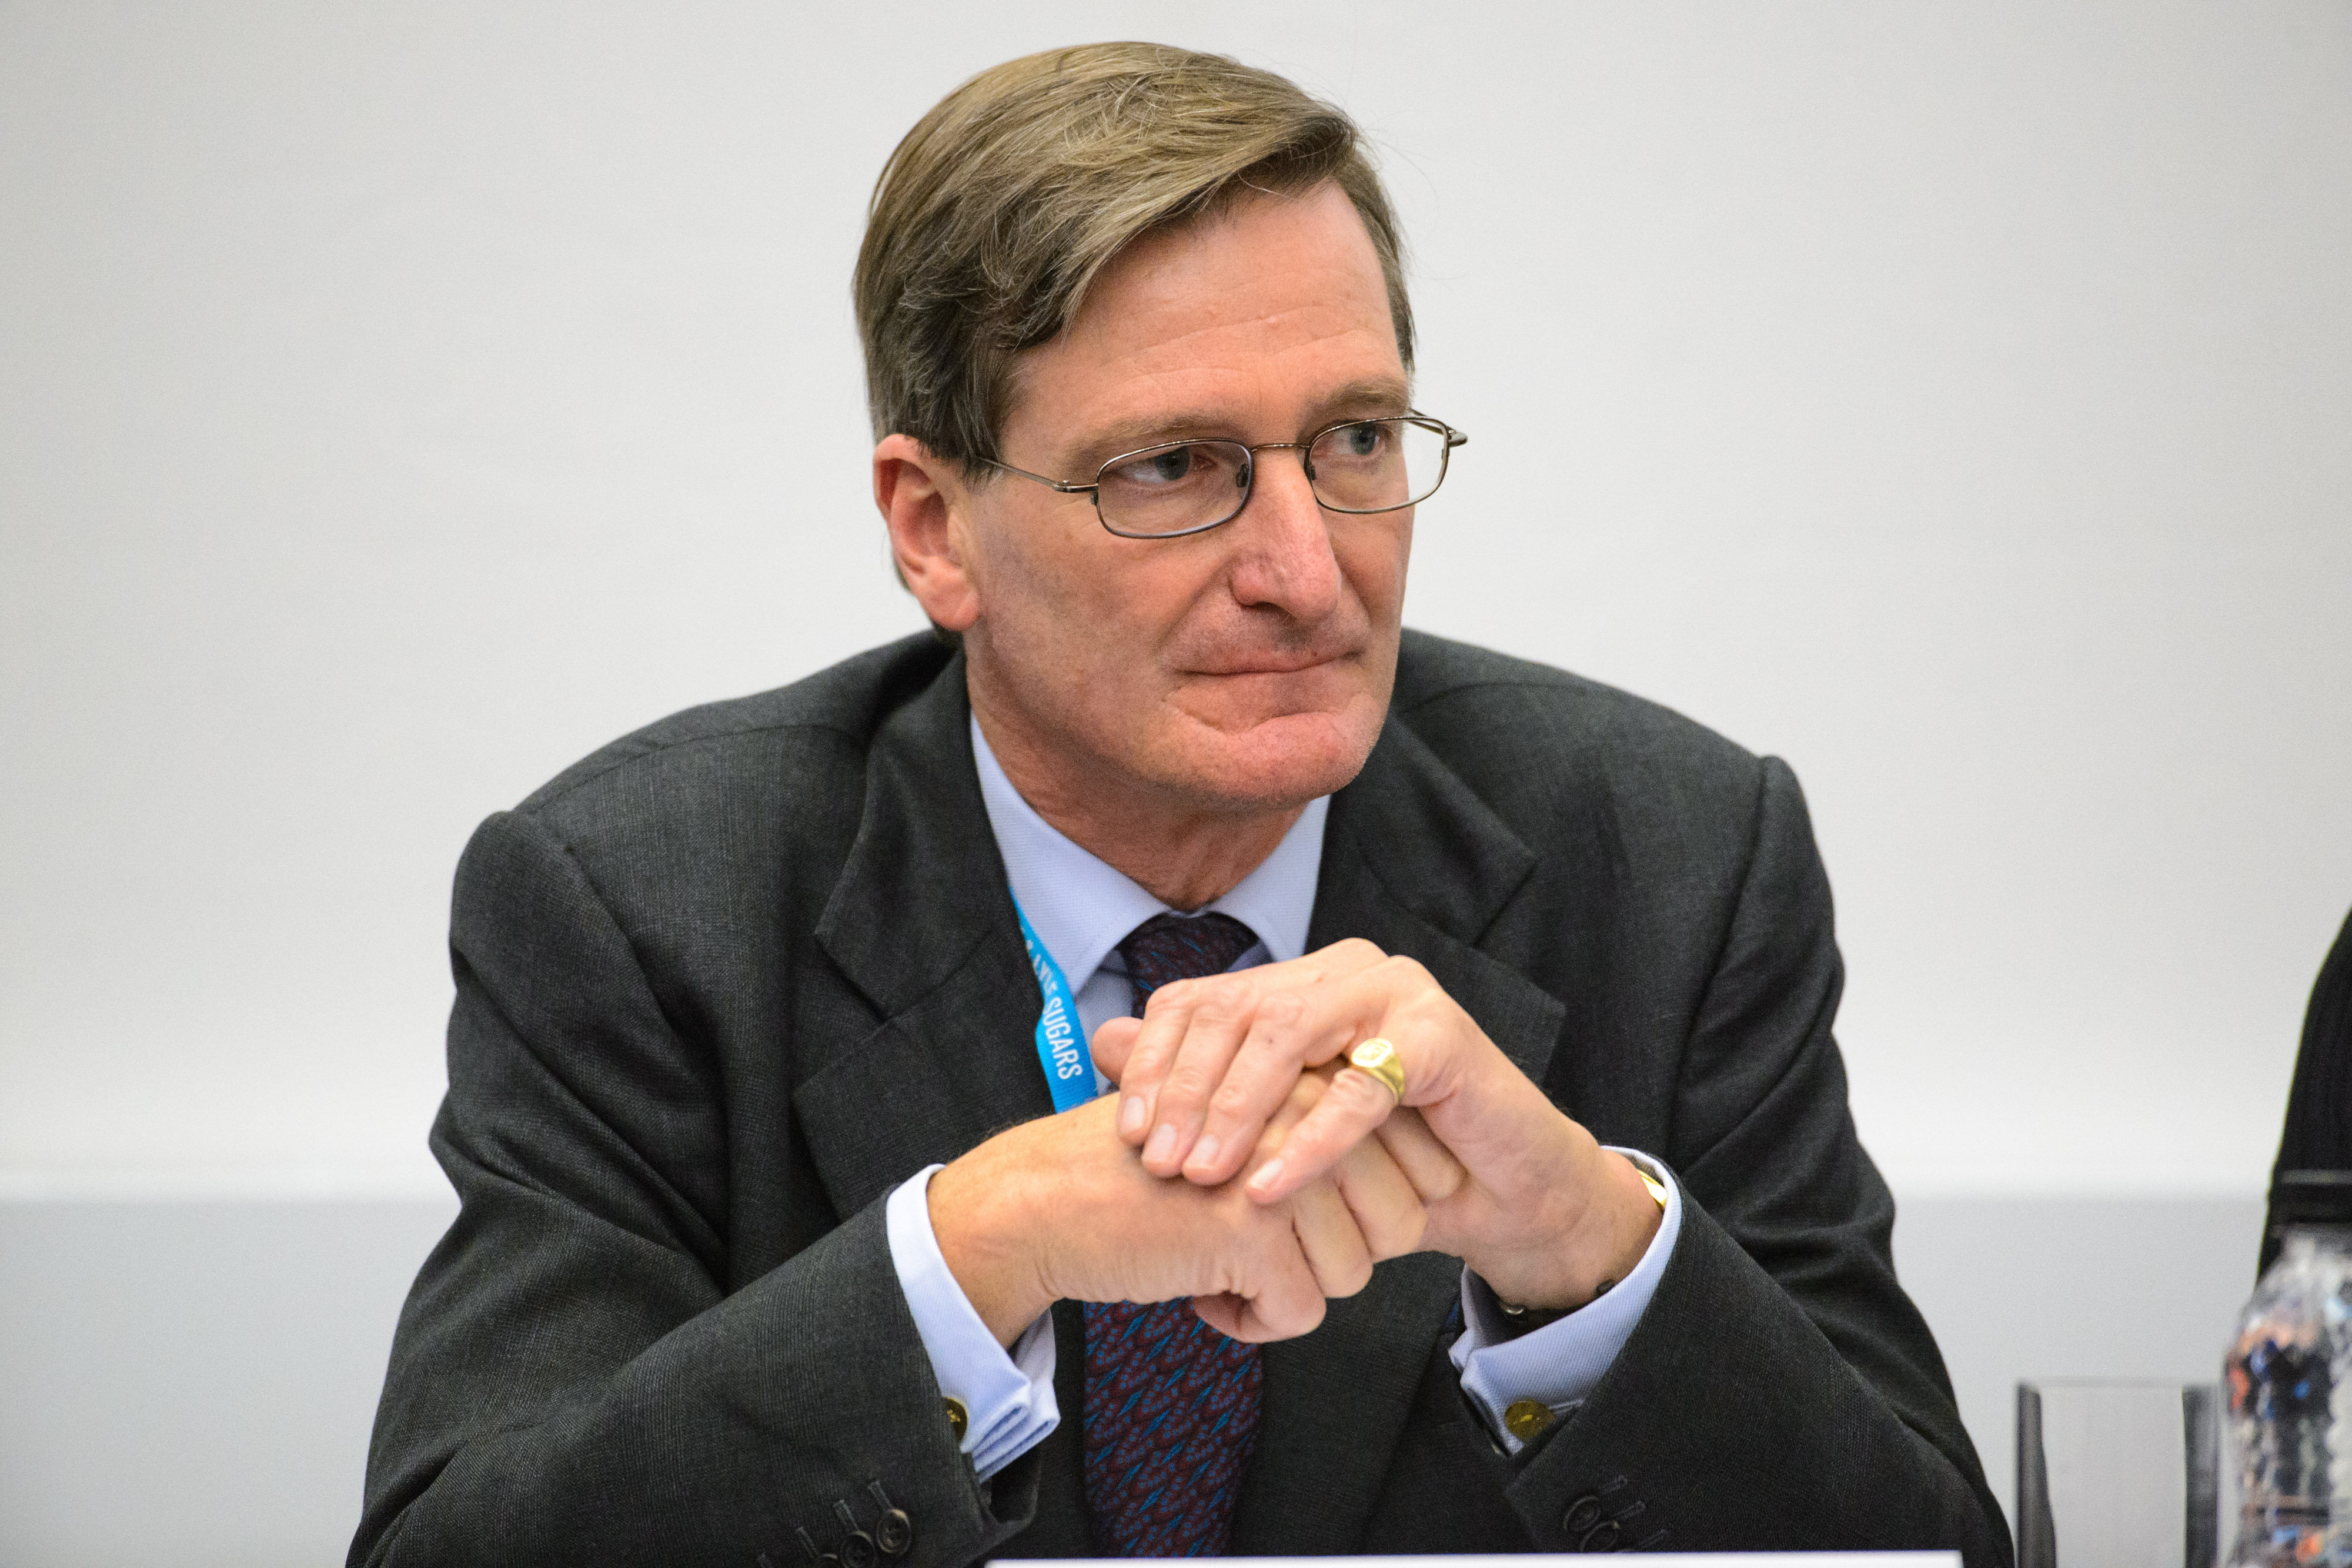 <i>Former Attorney-General Dominic Grieve is seen as the ringleader of the 'mutineers'.</i>